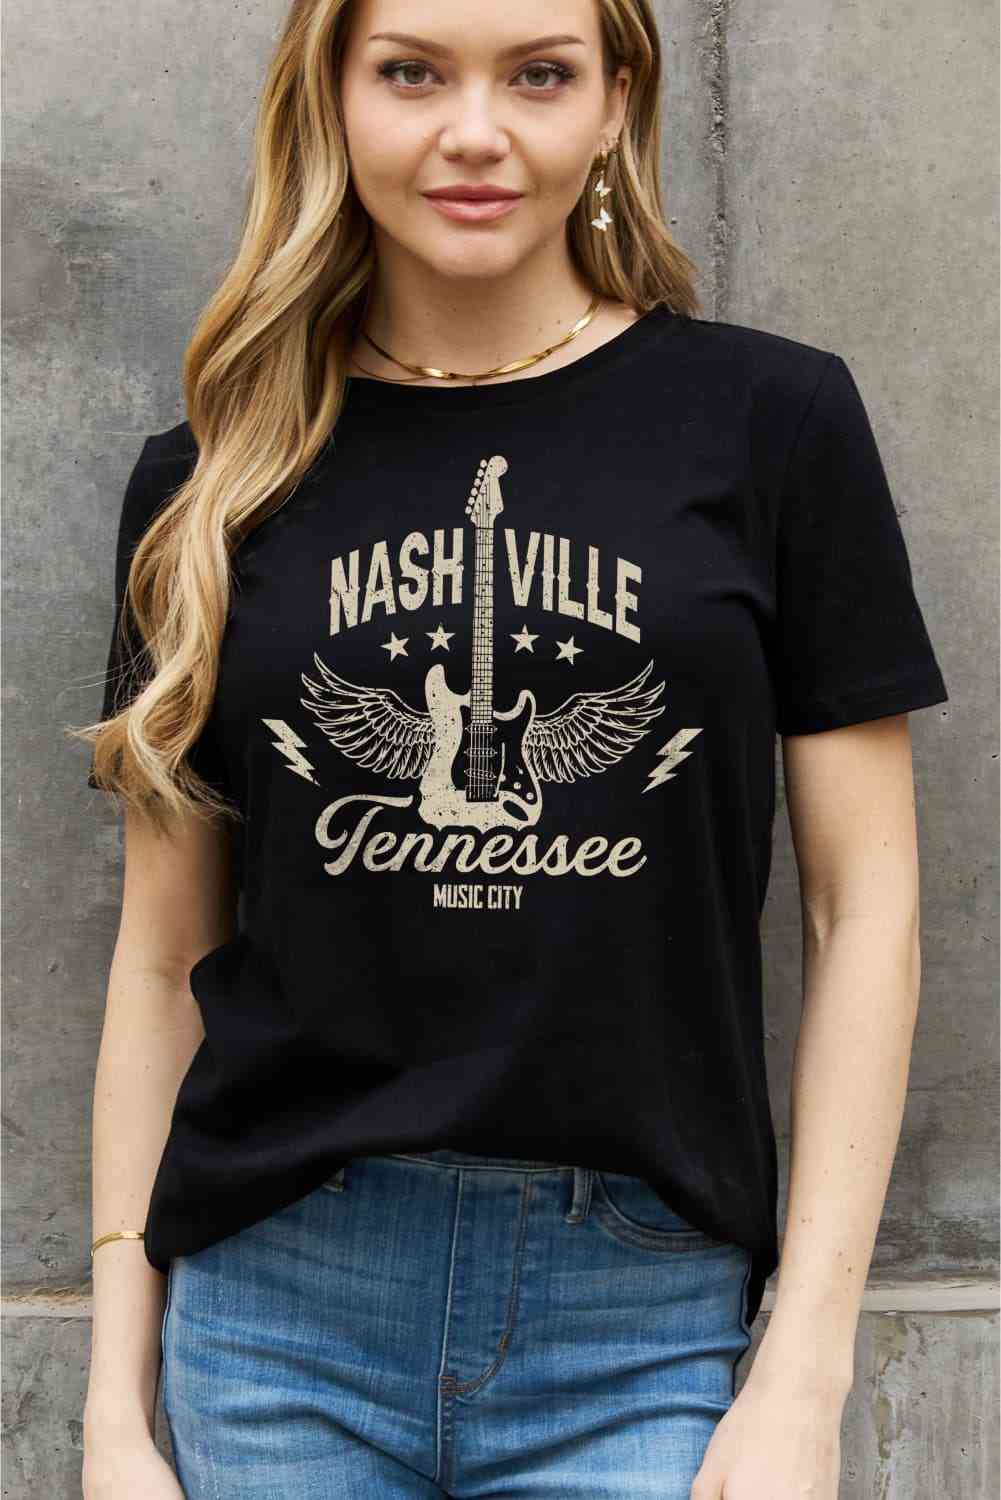 NASHVILLE TENNESSEE MUSIC CITY Graphic Cotton Tee - Black / S - T-Shirts - Shirts & Tops - 6 - 2024